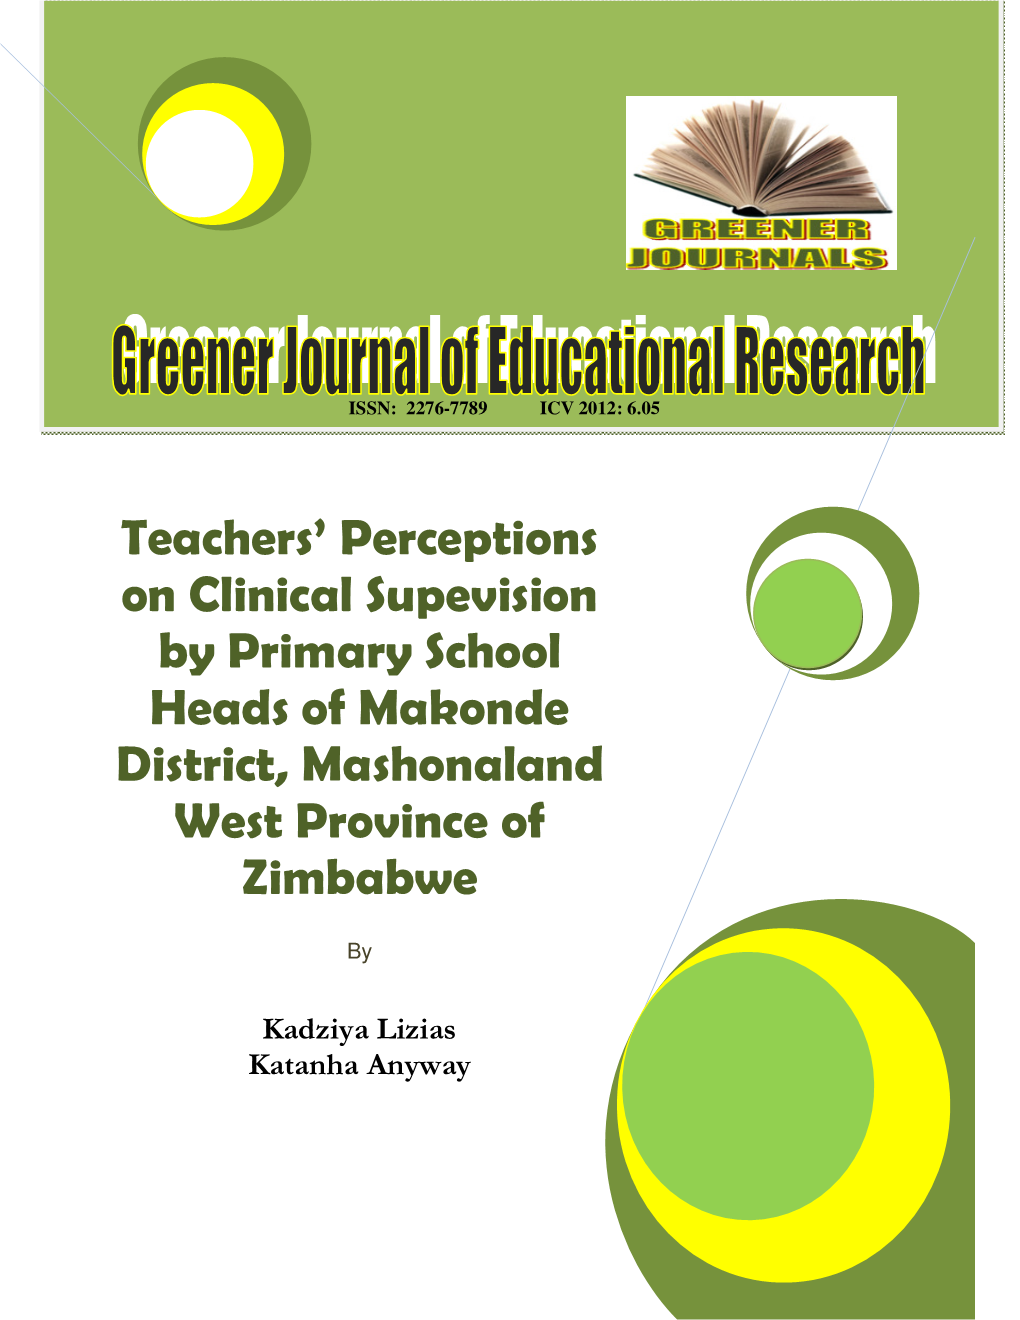 Teachers' Perceptions on Clinical Supevision by Primary School